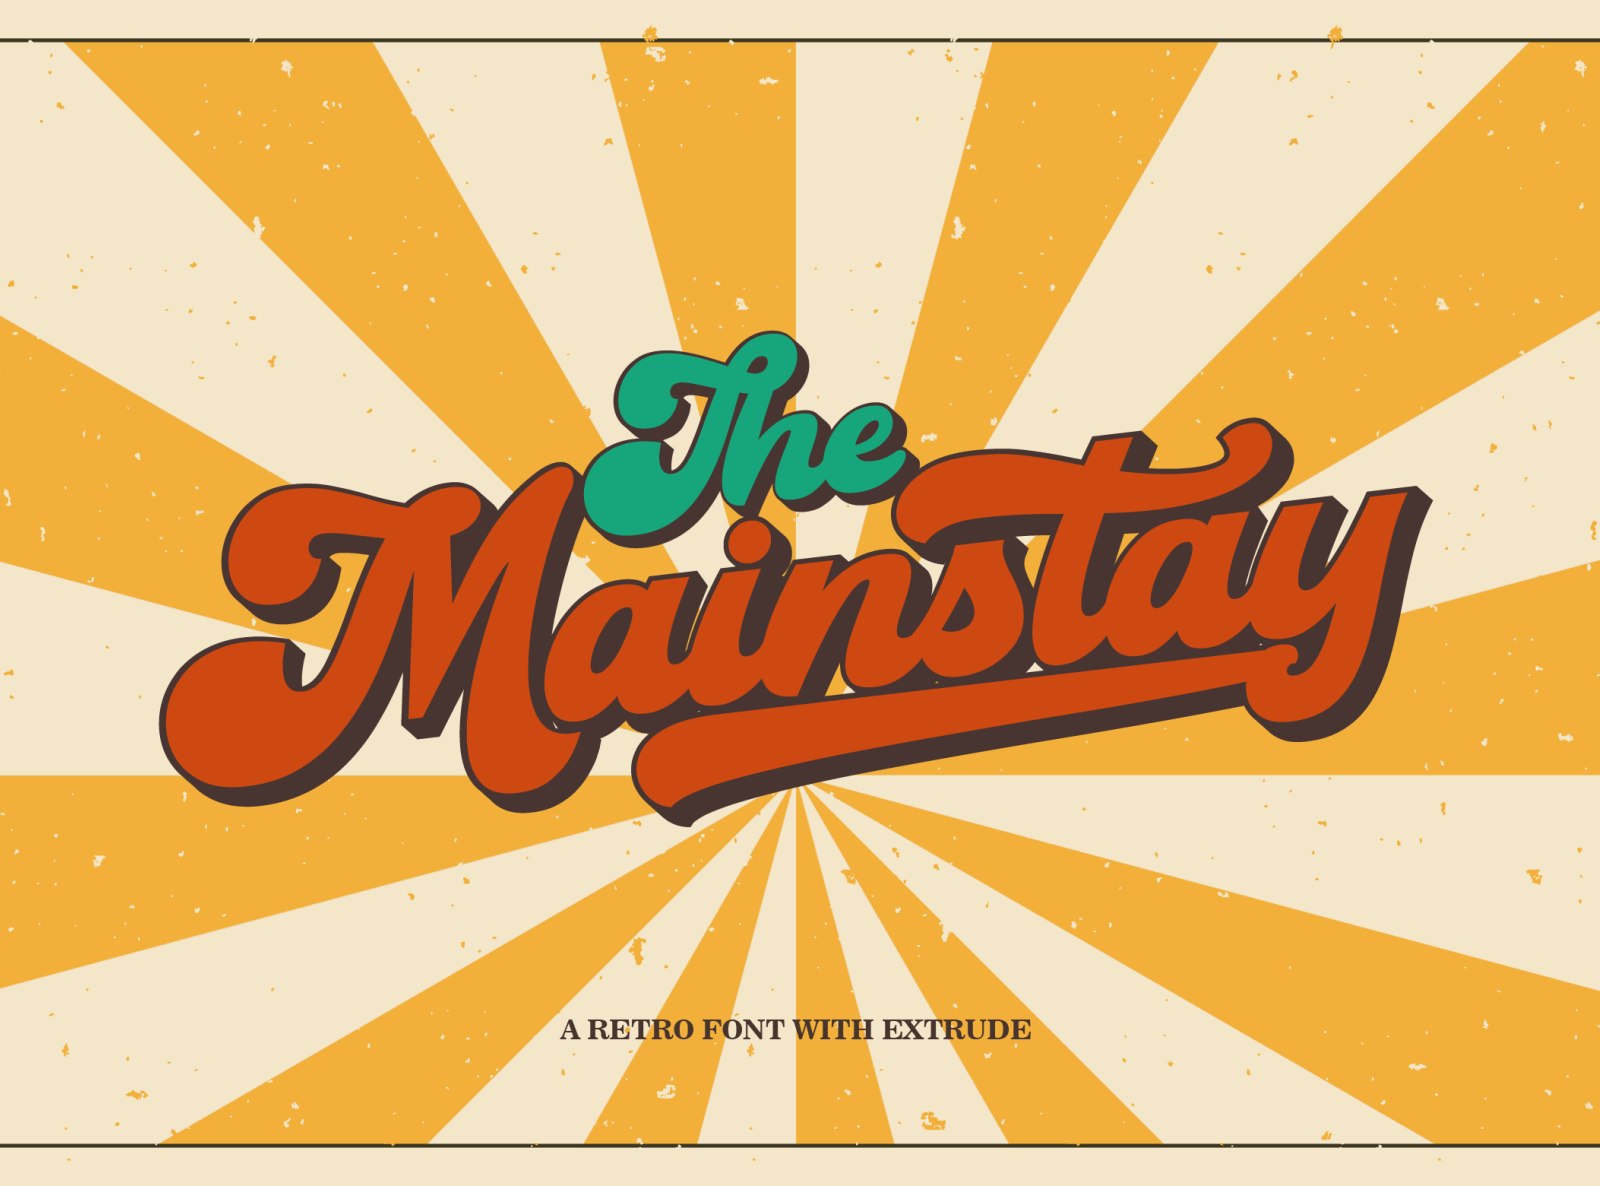 Mainstay - Retro Font with Extrude by ahweproject on Dribbble